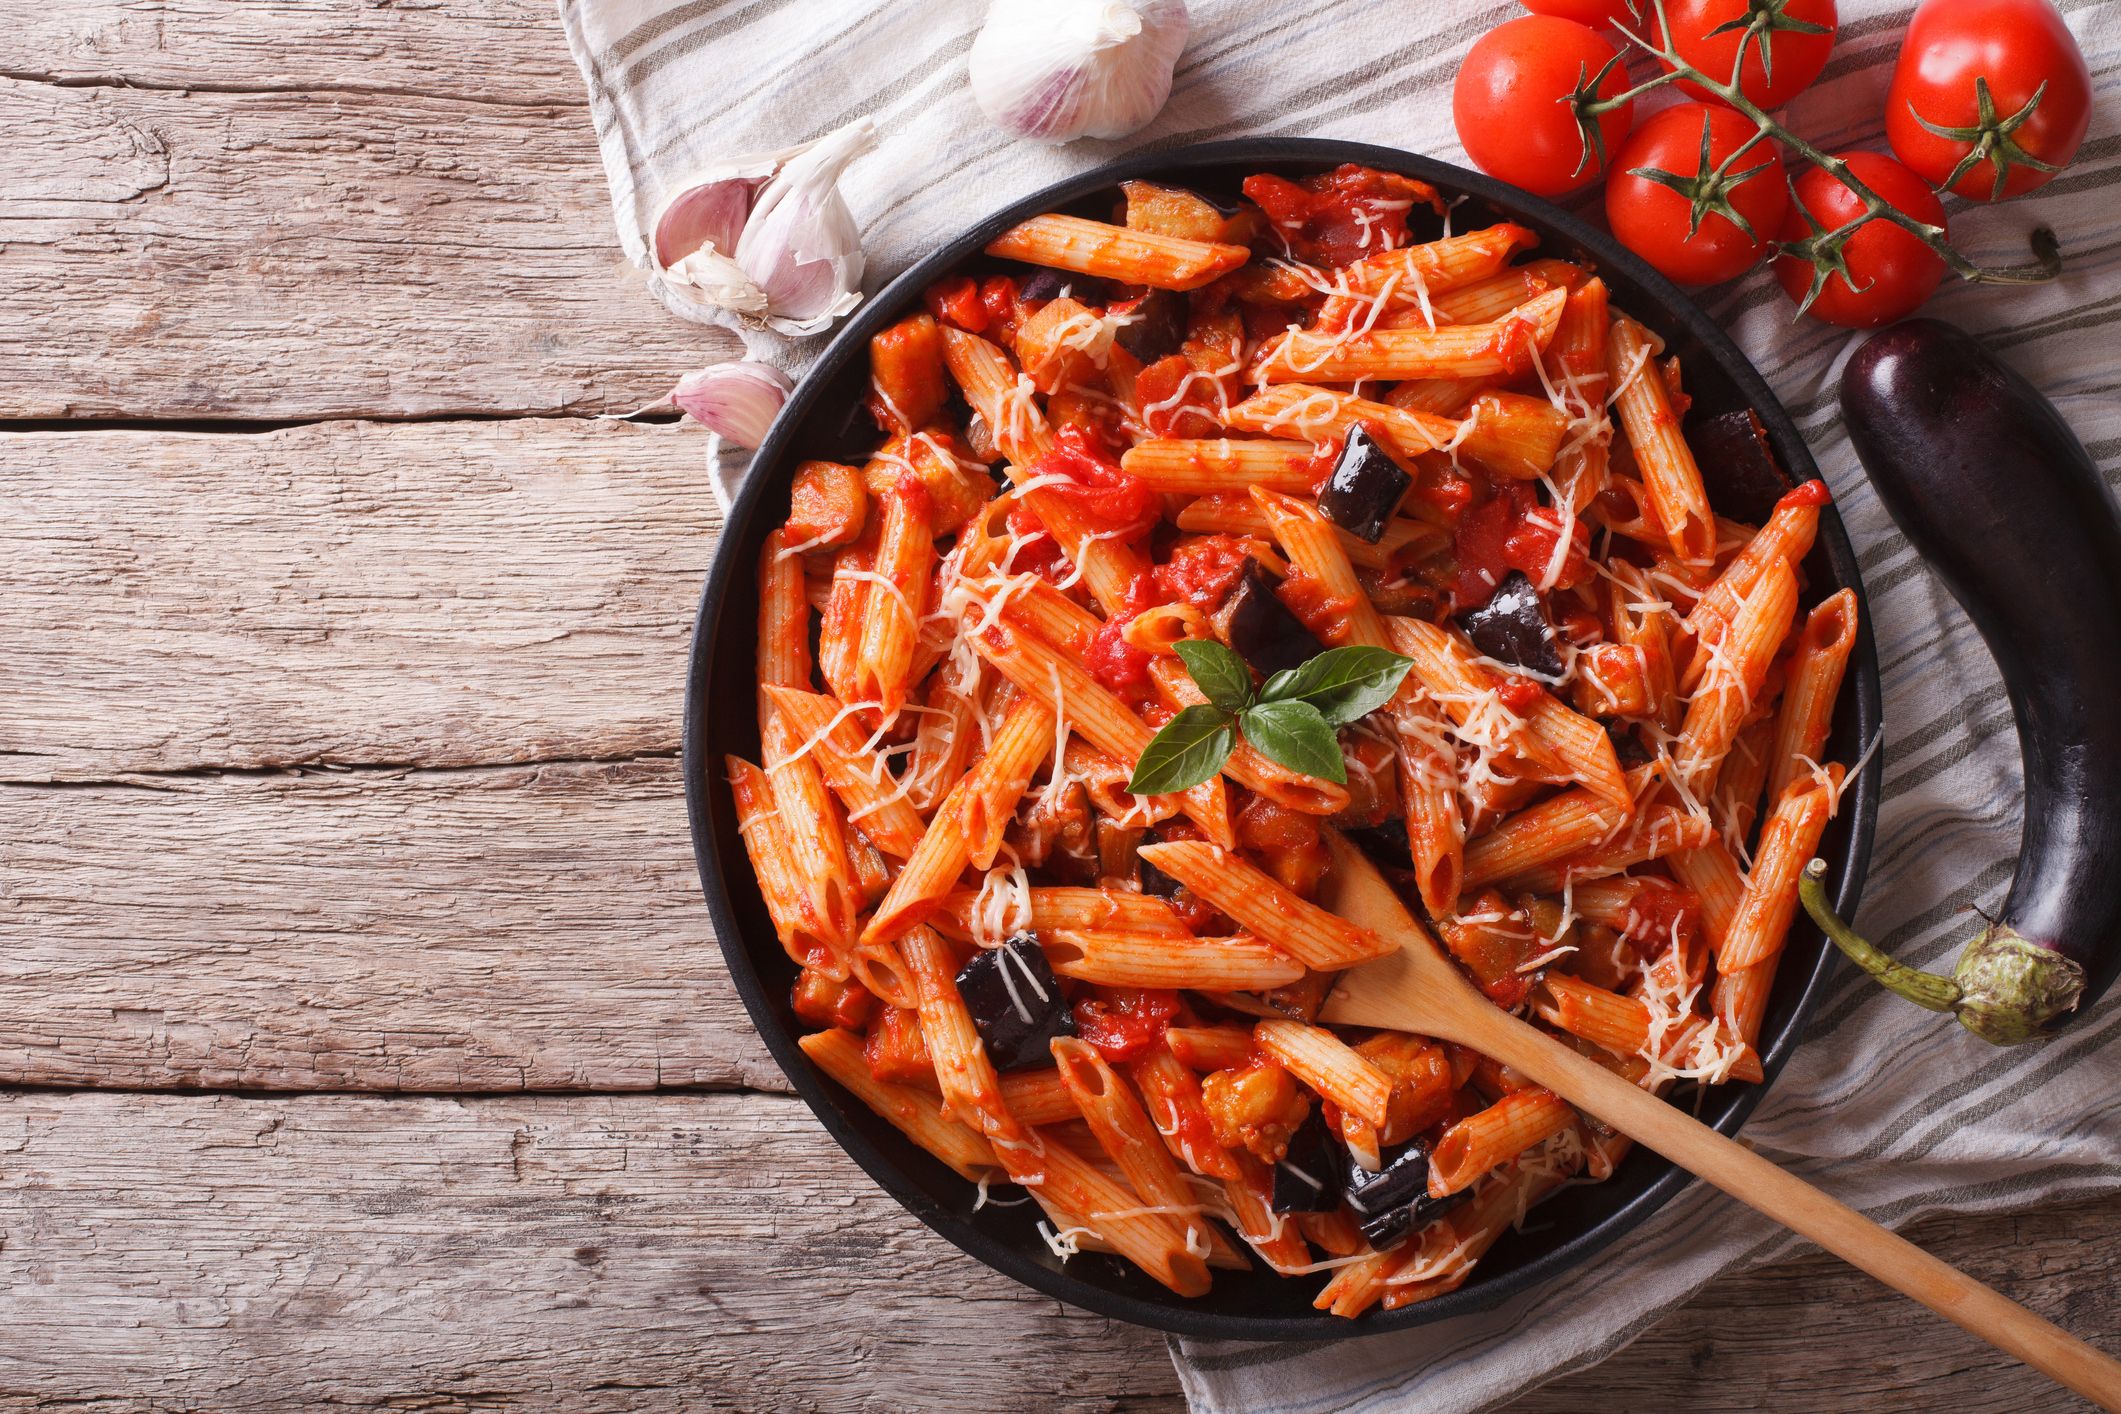 7 Healthy Pasta Alternatives If You're Low-Carb Or Gluten-Free